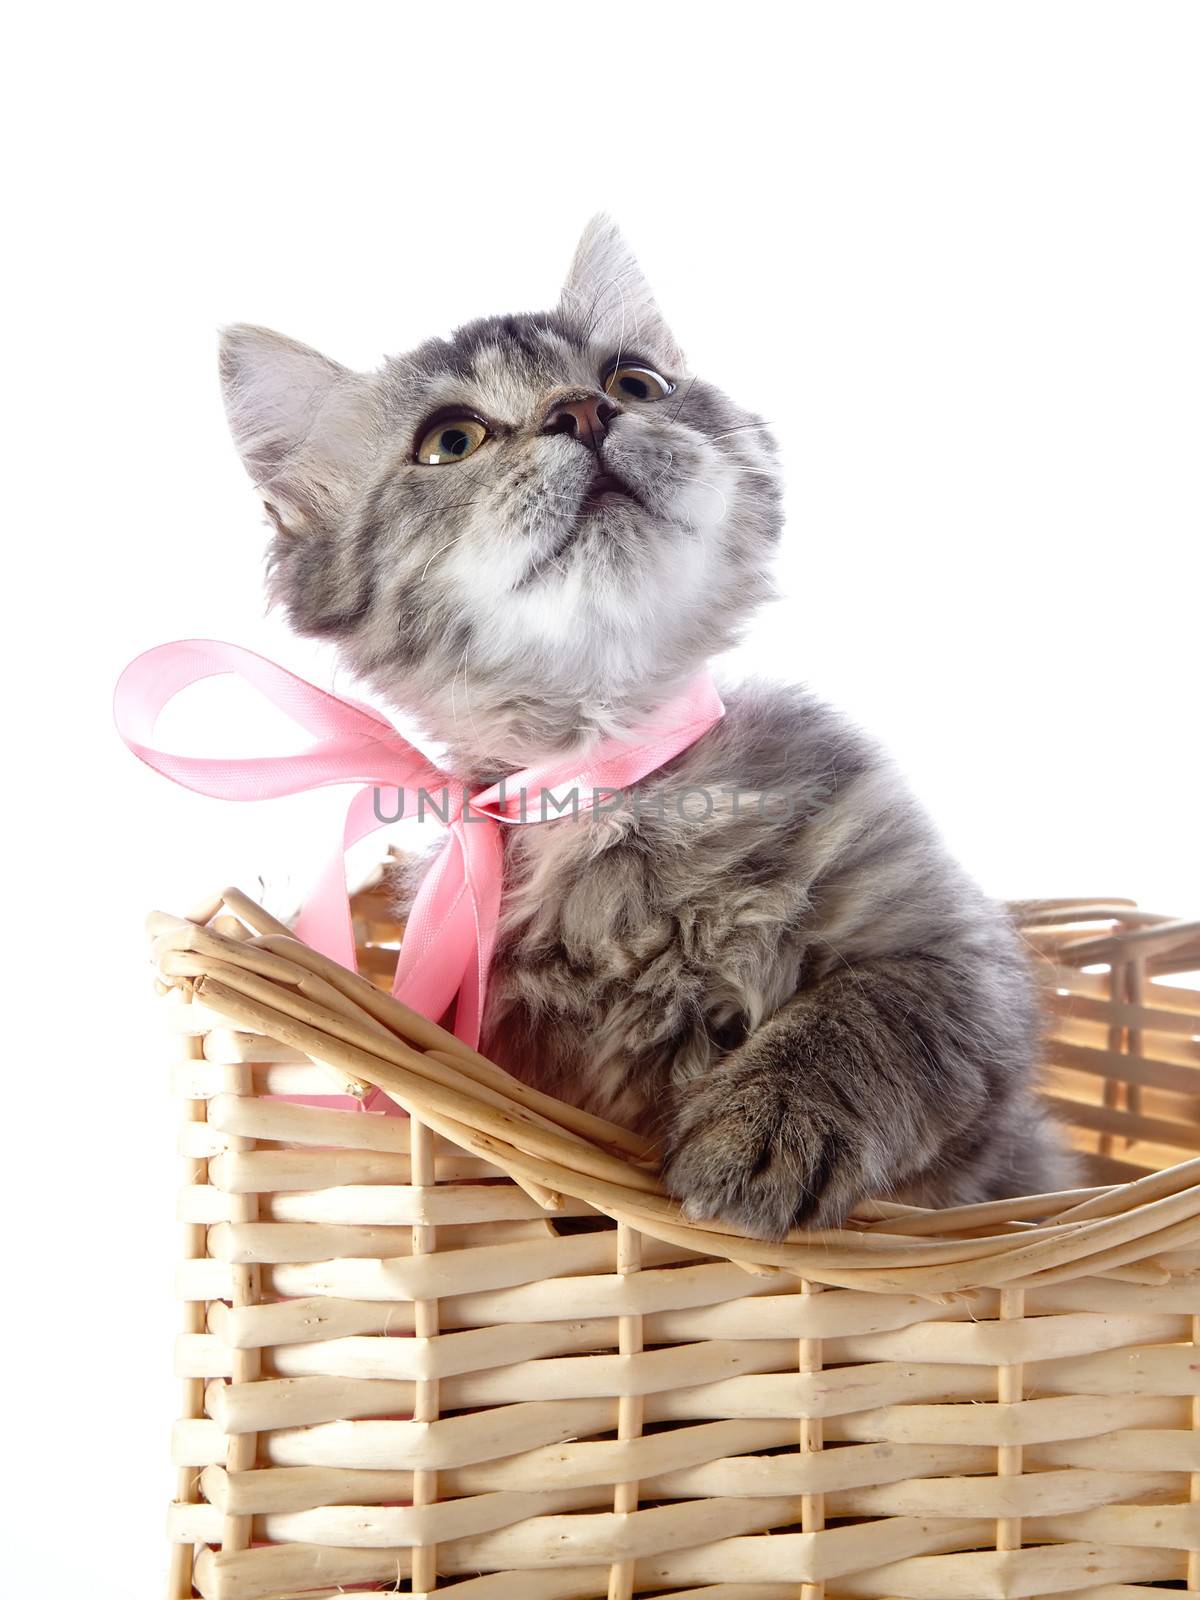 Cat in a wattled basket. Fluffy cat with yellow eyes.  Striped not purebred kitten. Kitten on a white background. Small predator. Small cat.